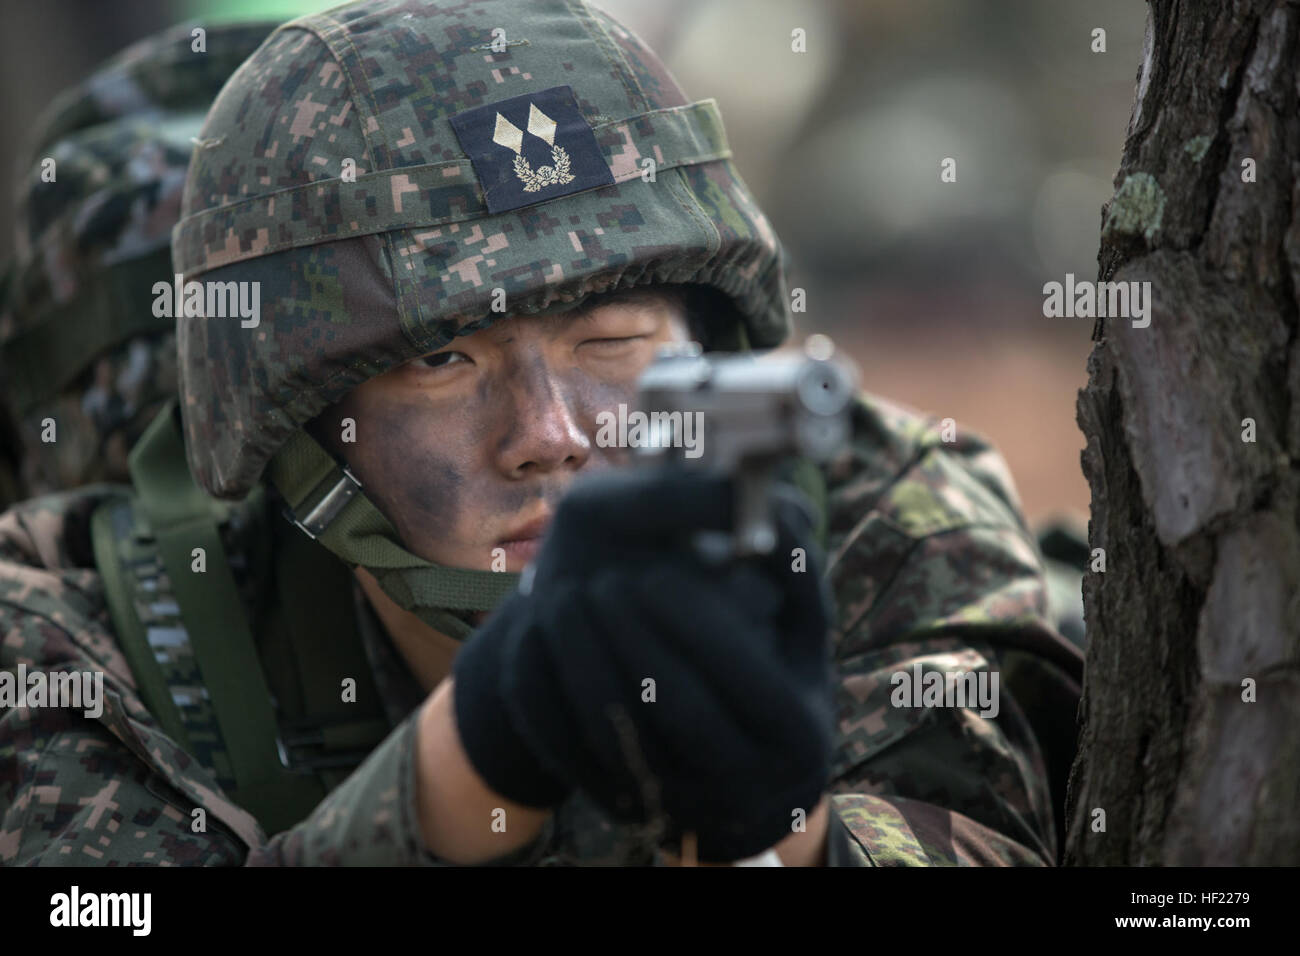 A South Korean marine with the 7th Marine Regiment participates in Ssang Yong 14, a part of Marine Expeditionary Force Exercise (MEFEX) 2014, in Pohang, South Korea, March 31, 2014. MEFEX was a U.S. Marine Corps Forces Pacific-sponsored series of exercises between the U.S. Navy and Marine Corps and South Korean forces. Among the exercises were the Korea Marine Exercise Program, Freedom Banner 14, Ssang Yong 14, Key Resolve 14 and the Combined Marine Component Command 14 command post exercise. (DoD photo by Cpl. Sara A. Medina, U.S. Marine Corps/Released) A South Korean marine with the 7th Mari Stock Photo